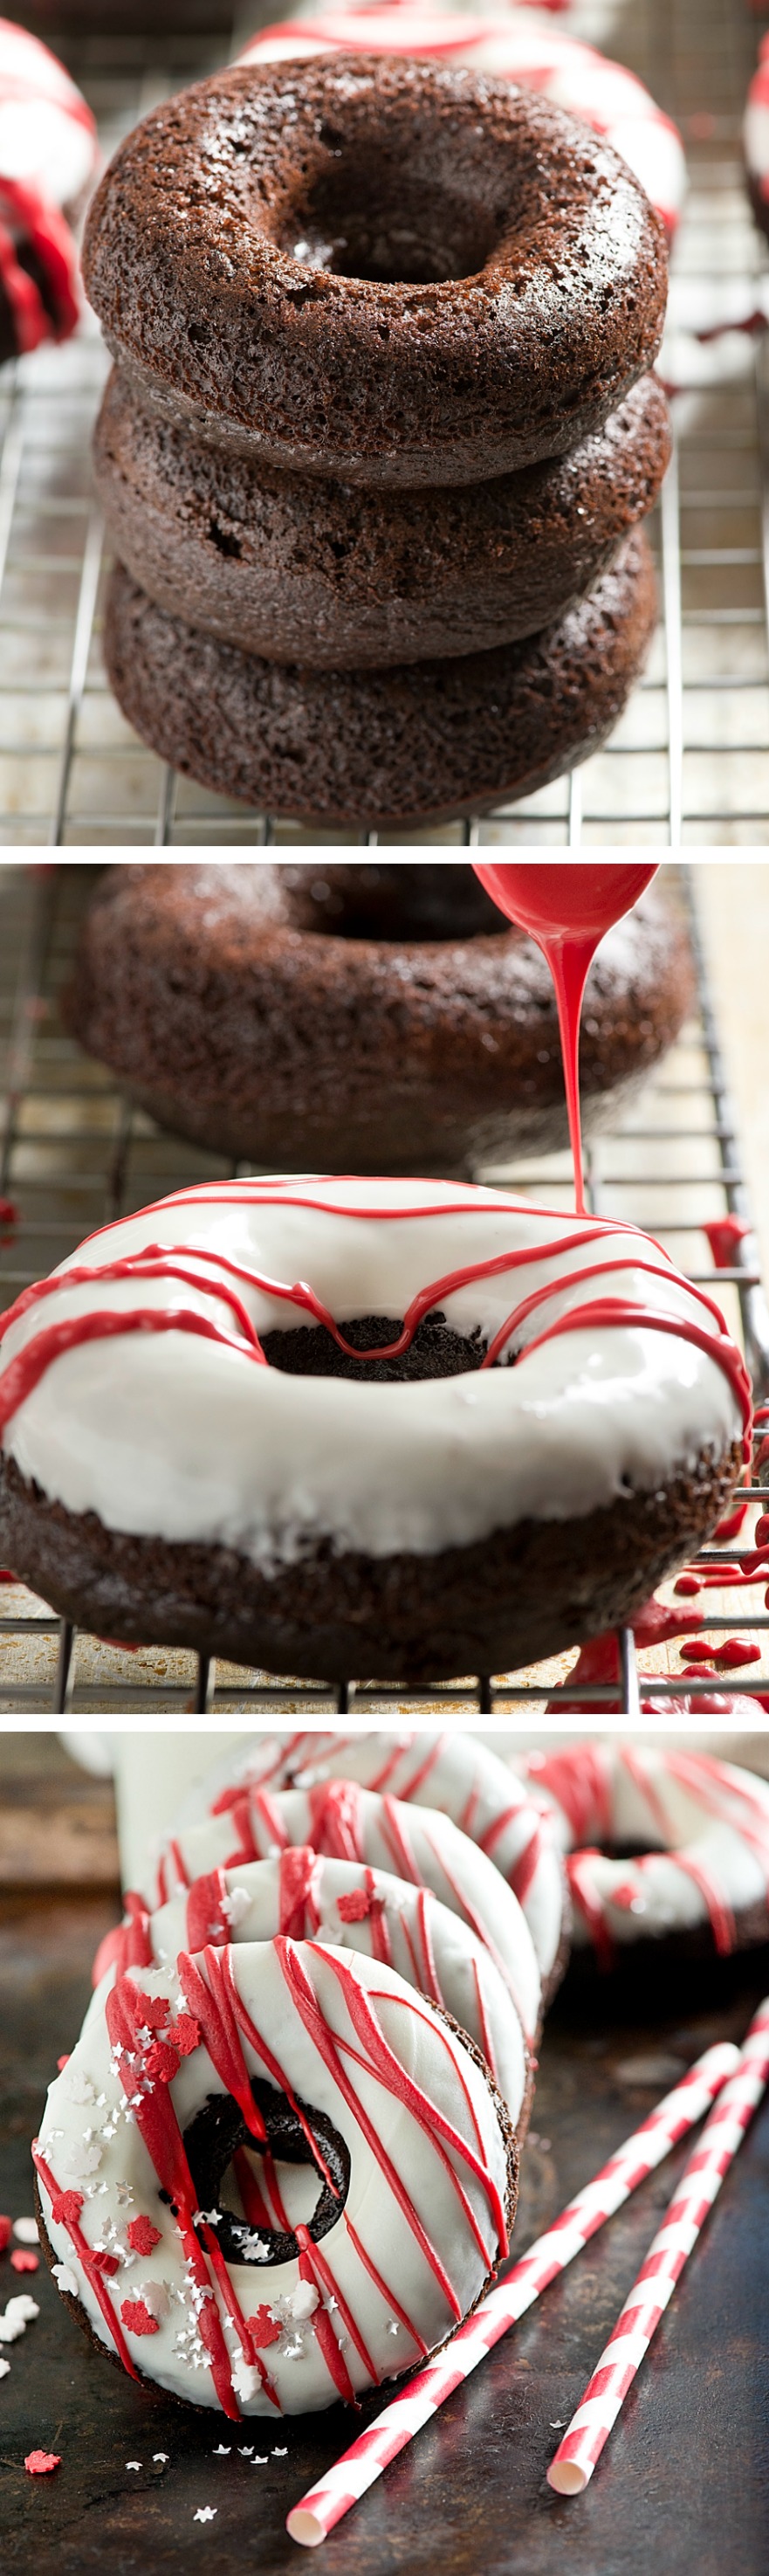 This moist and delicious Baked Dark Chocolate Buttermilk Donuts Recipe can be made and glazed in under an hour! A perfect rich and tender, chocolate-y cake donut! So easy and perfect for entertaining or special celebrations like Canada Day! Created for Canada 150! 